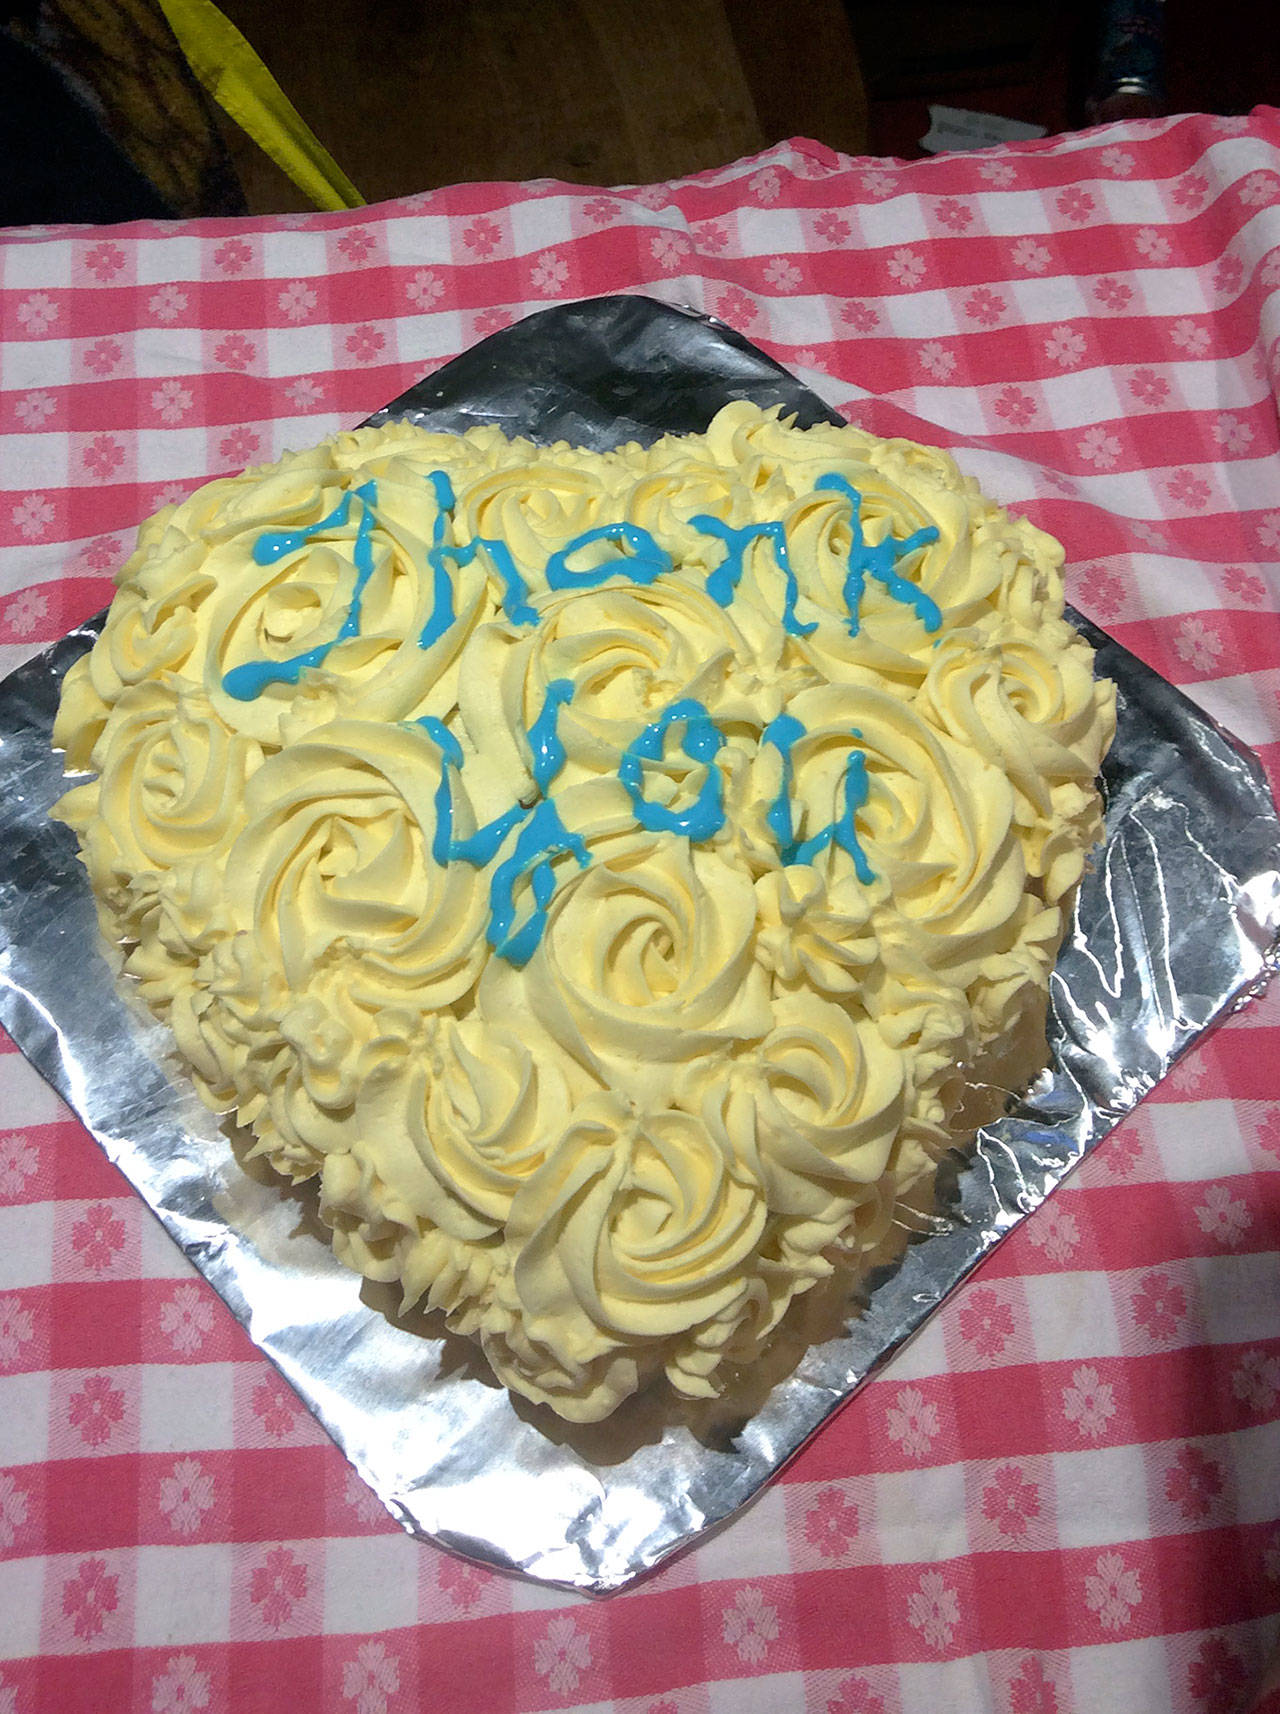 Contributed photo — Erin Kelly was so appreciative of Marc Swenson’s efforts that she baked him a “Thank You” cake.